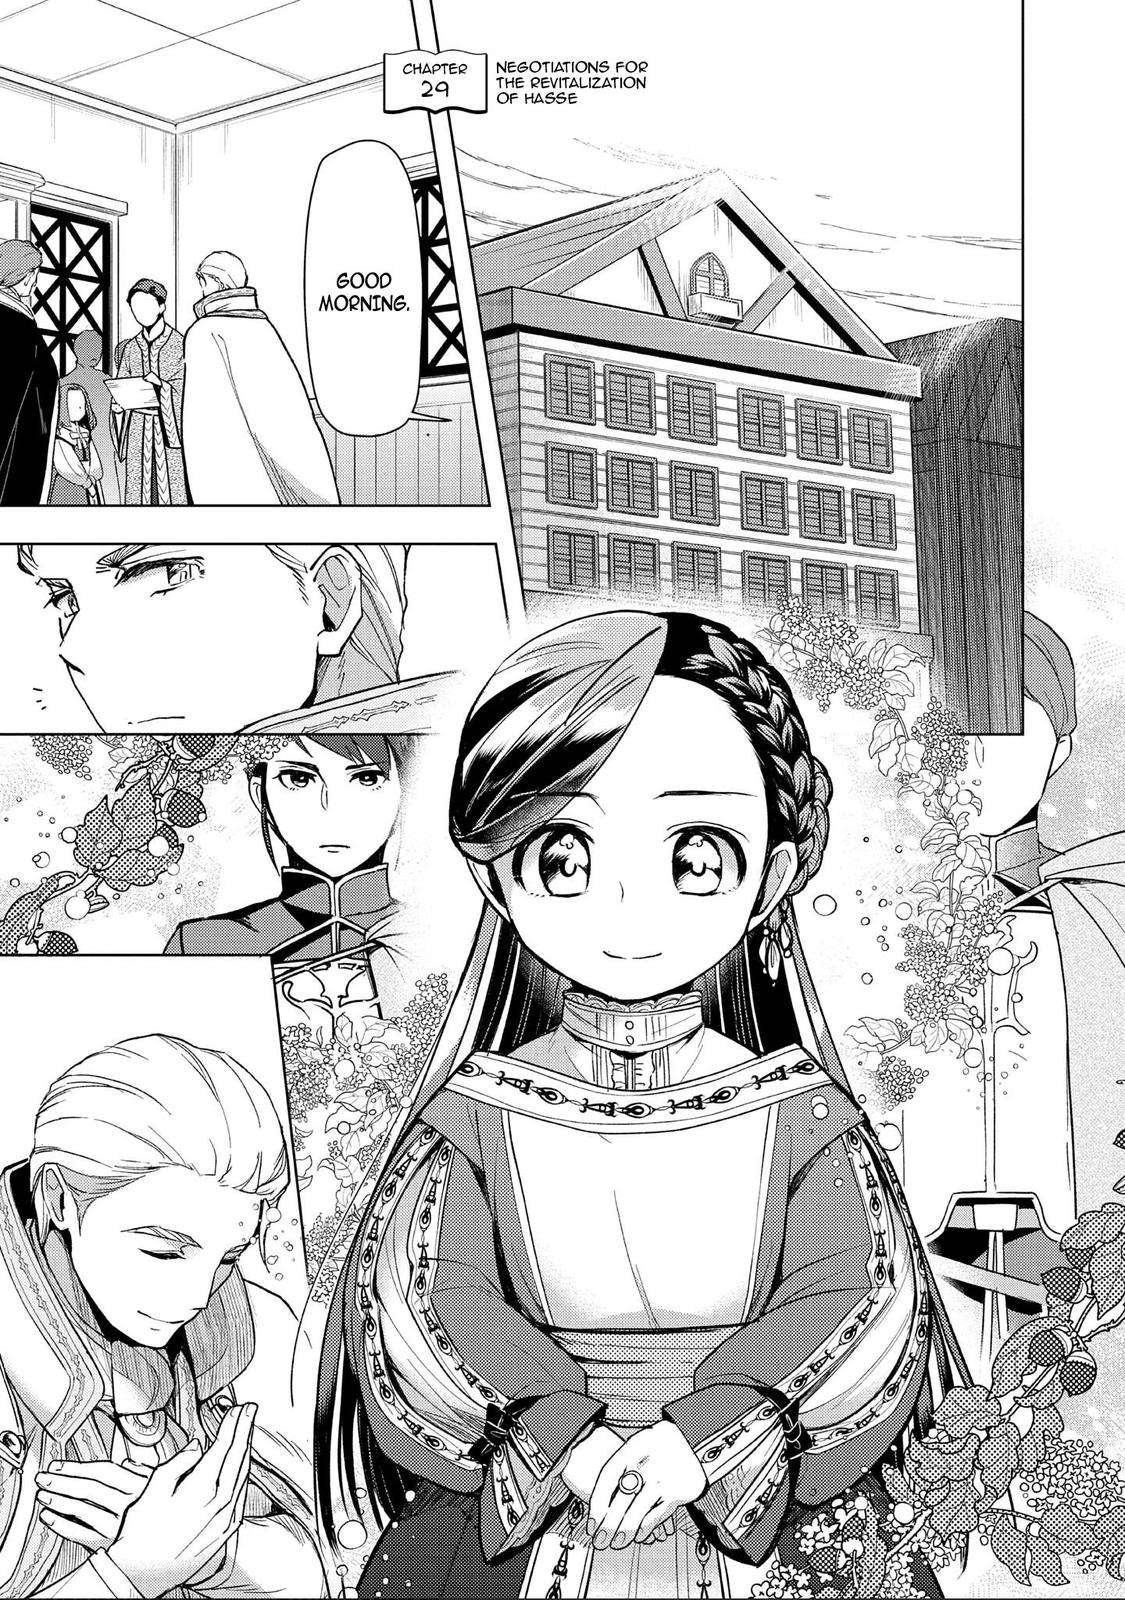 Read Ascendance of a Bookworm Part 3 Manga English [New Chapters